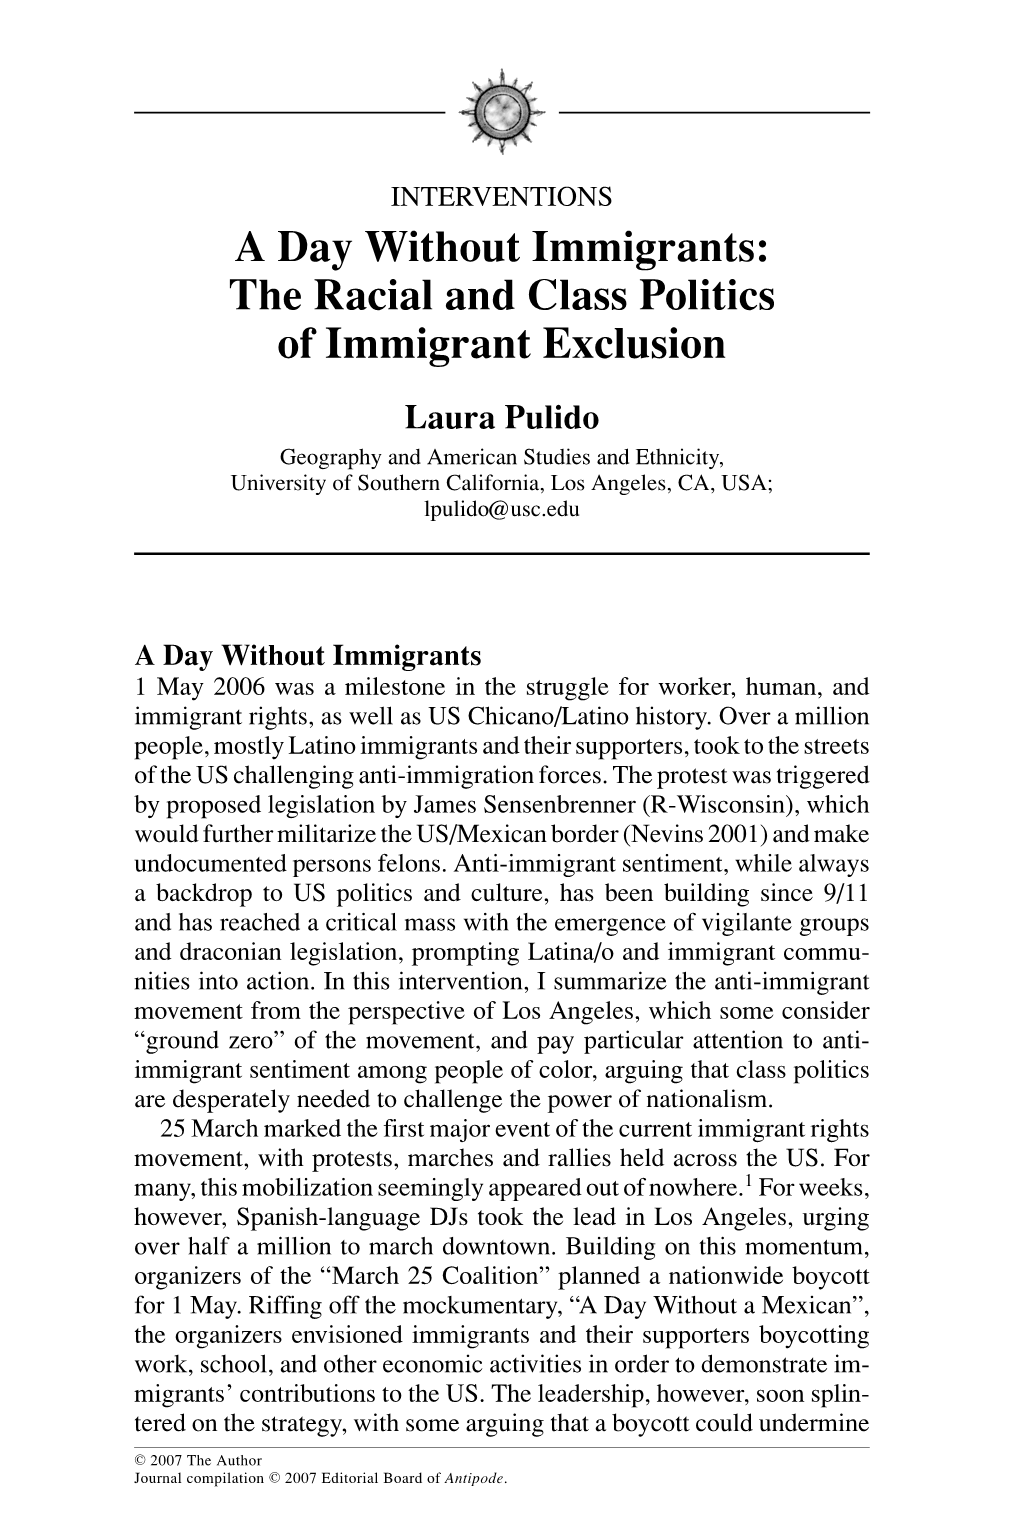 A Day Without Immigrants: the Racial and Class Politics of Immigrant Exclusion